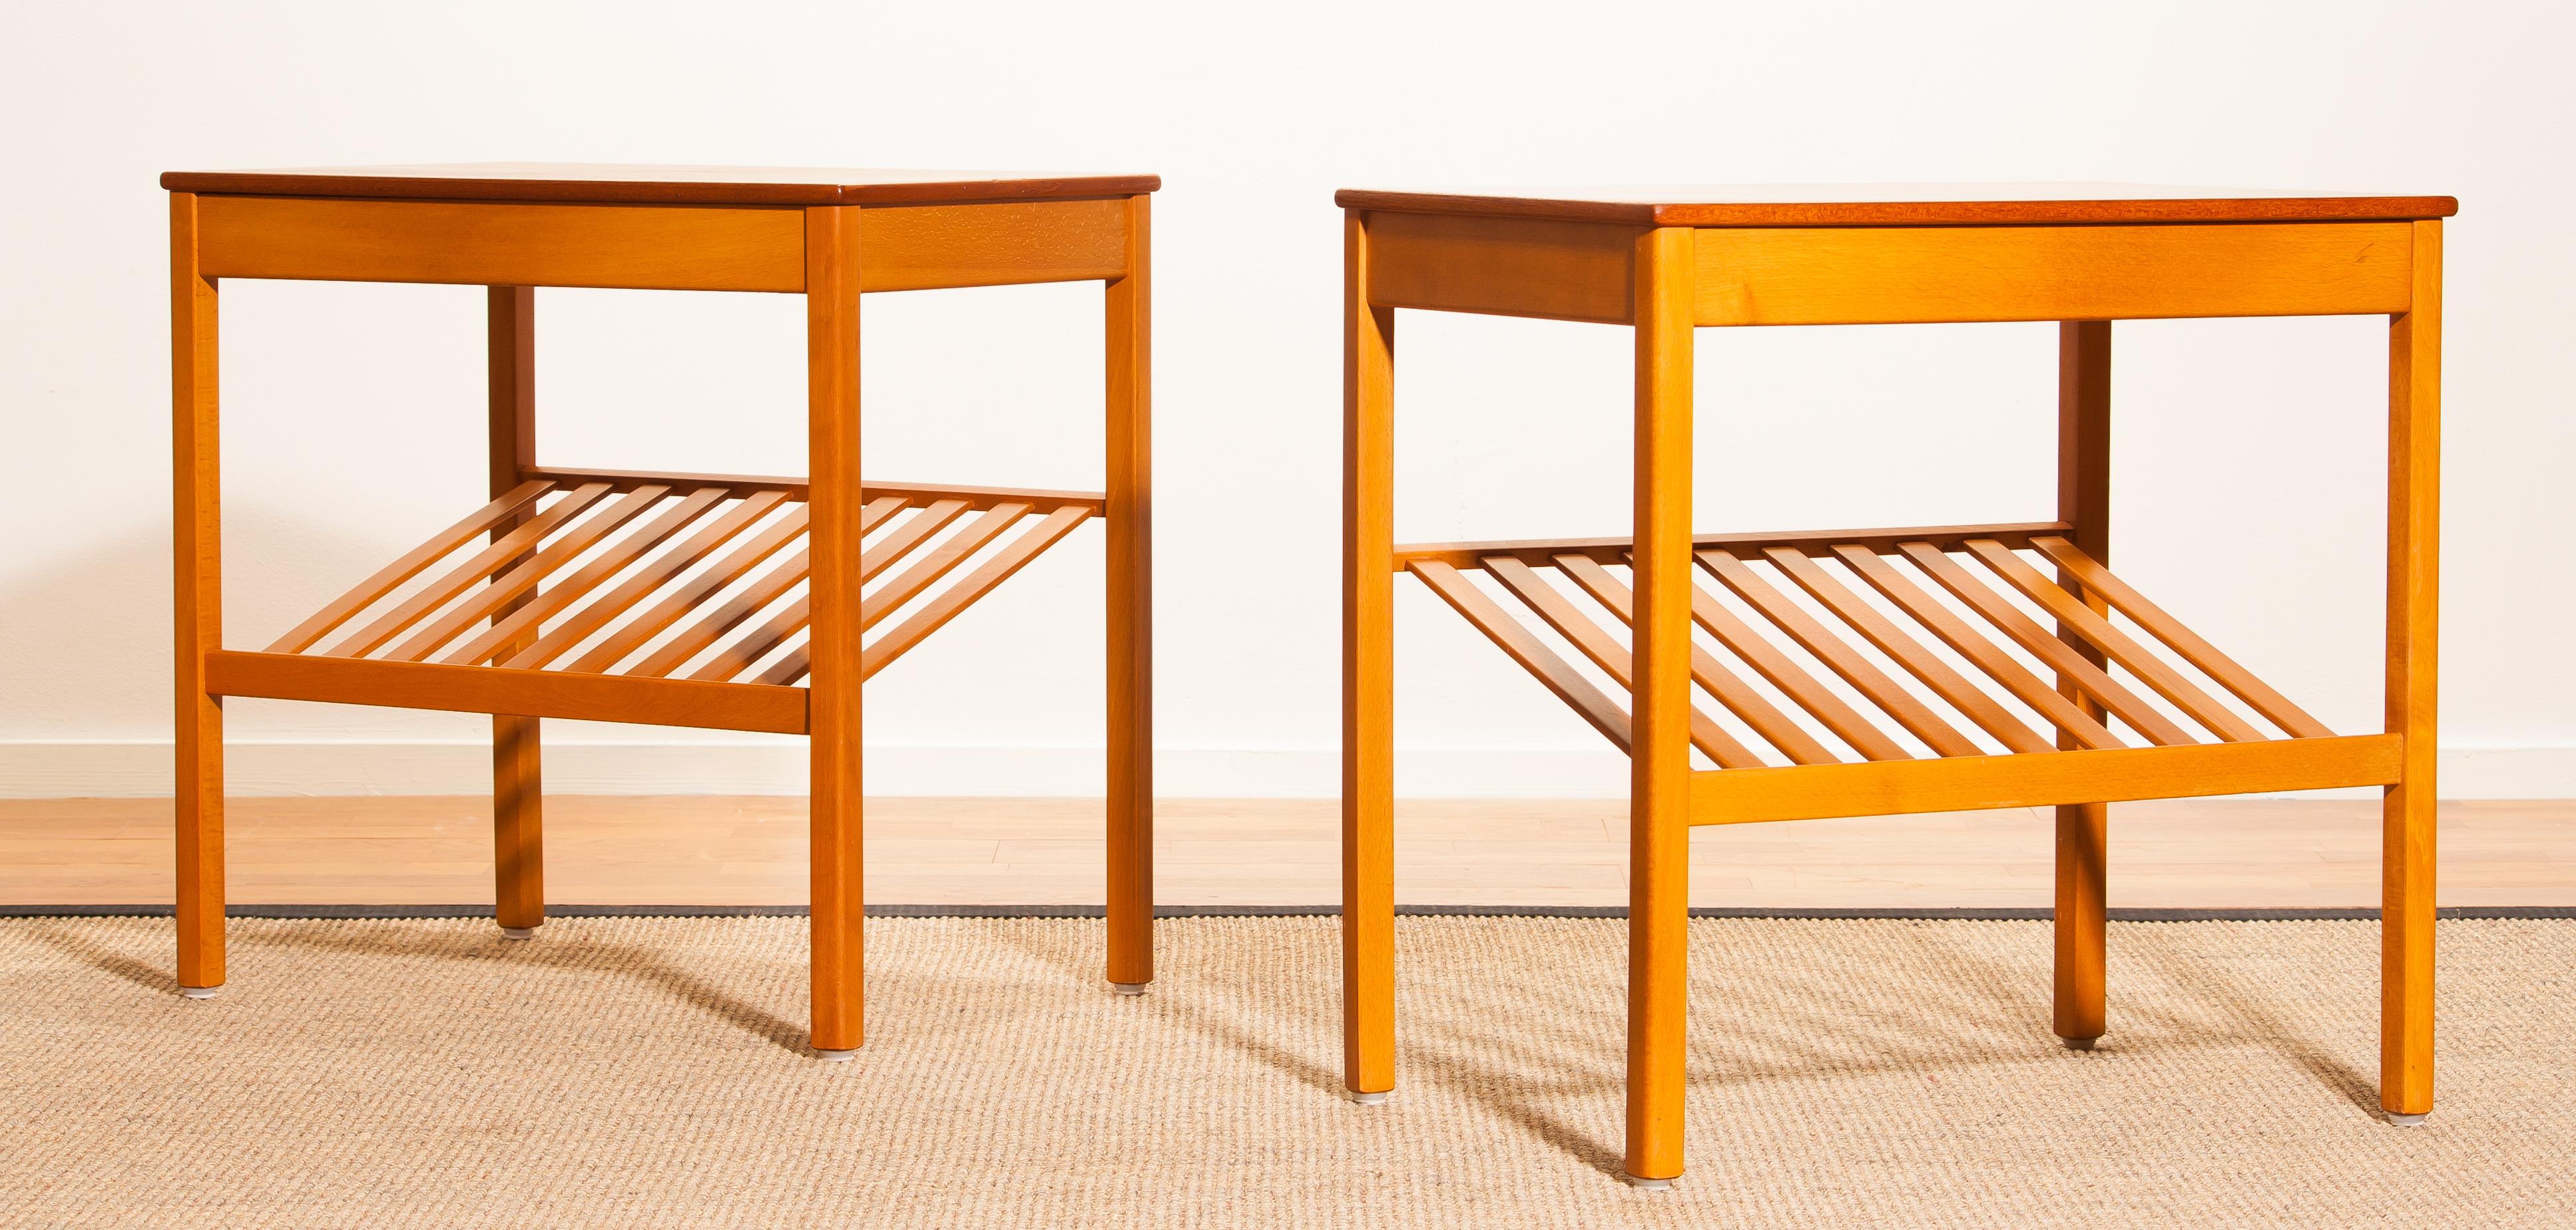 Beautiful pair of large nightstands, side tables designed by Jean Huber for Tingstroms - Bra Bohag, Sweden.
These bedside tables are made of teak and have a drawer and a magazine rack.
They are in wonderful condition.
Period, 1950s
Dimensions: H